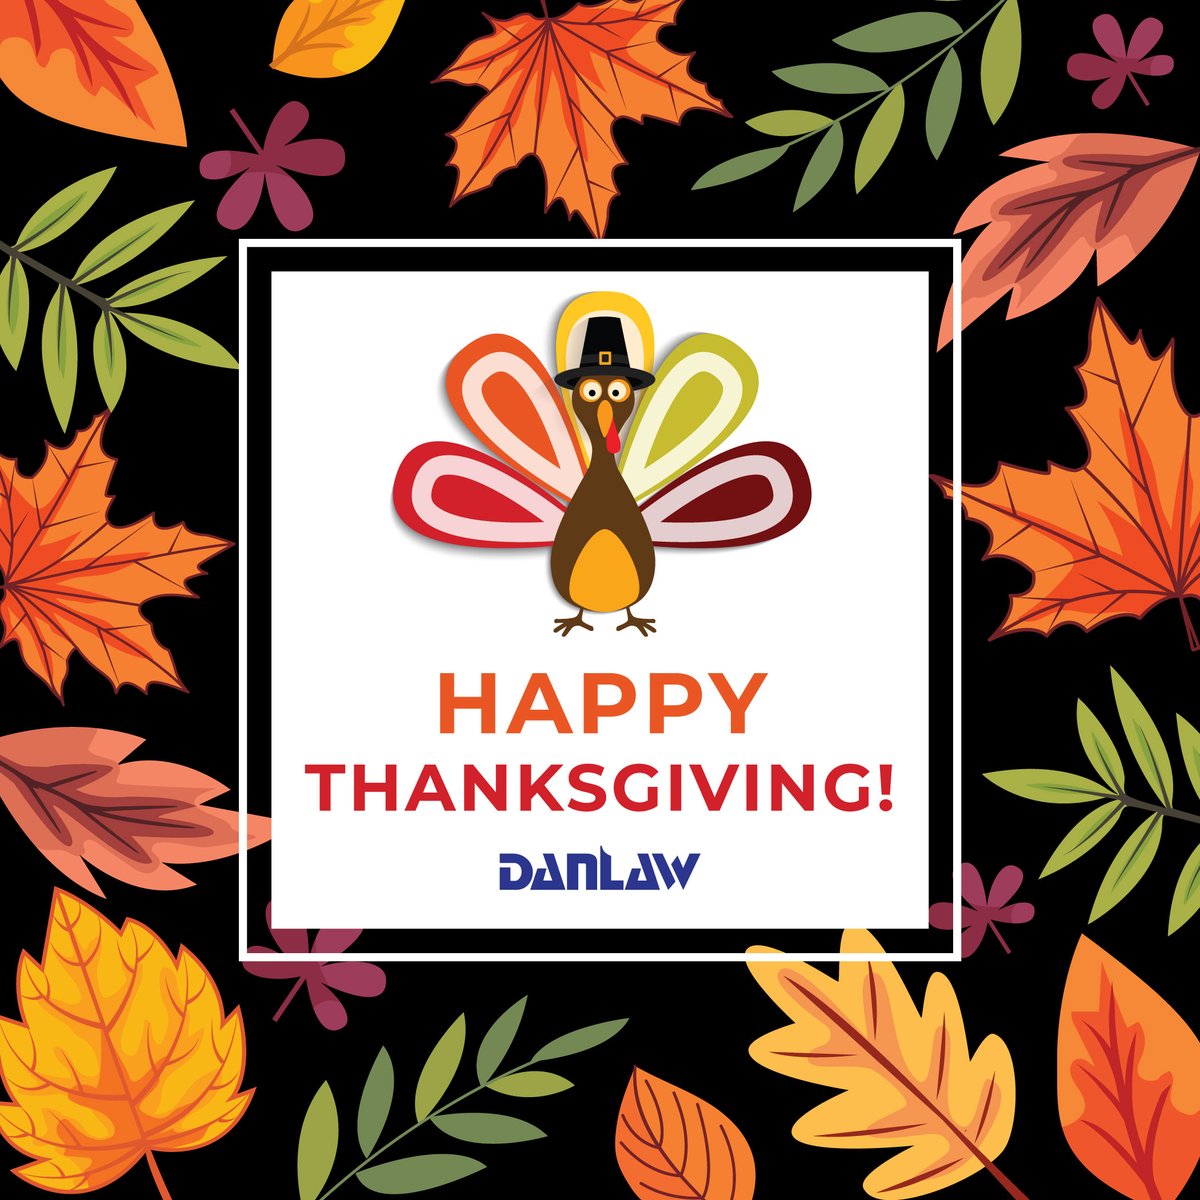 Happy Thanksgiving from the Danlaw Family! We are grateful to have such a dedicated, talented and committed team. We are thankful for your positivity and teamwork mentality in all you accomplish. We wish you all a wonderful Thanksgiving and holiday break! #HappyThanksgiving